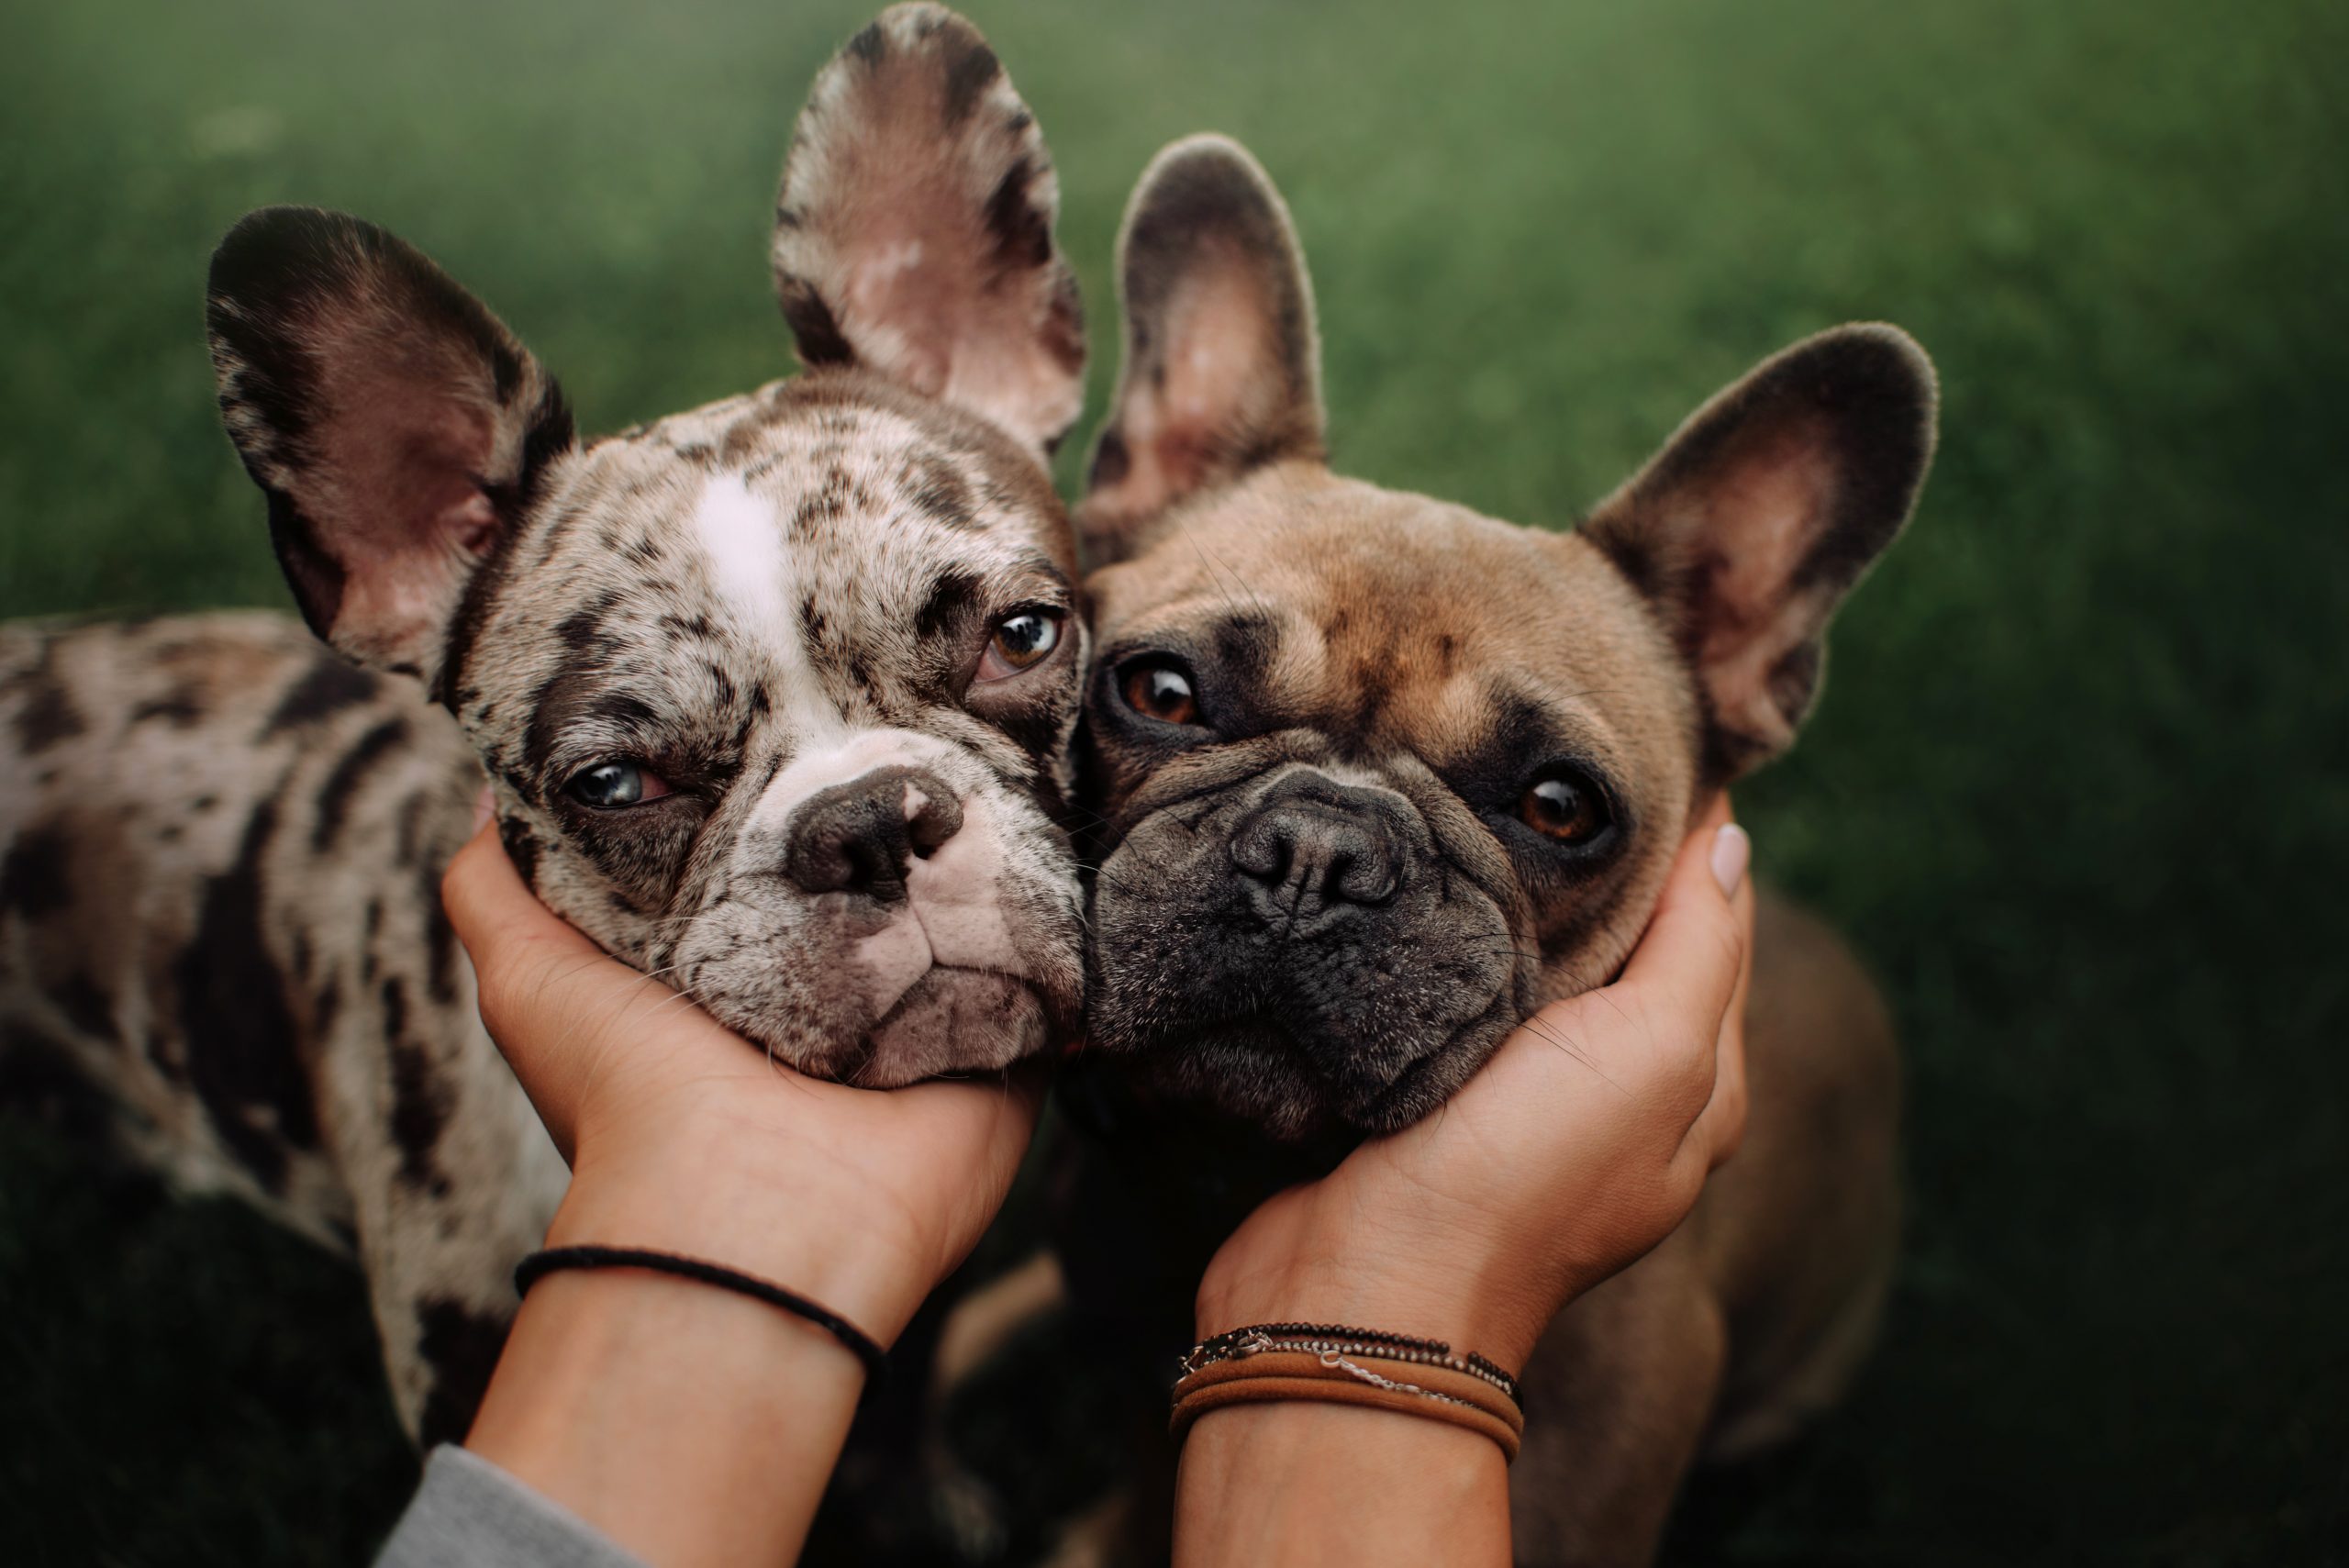 Should you get pet insurance for your French Bulldog? Plus 3 health risks to look out for with Frenchies